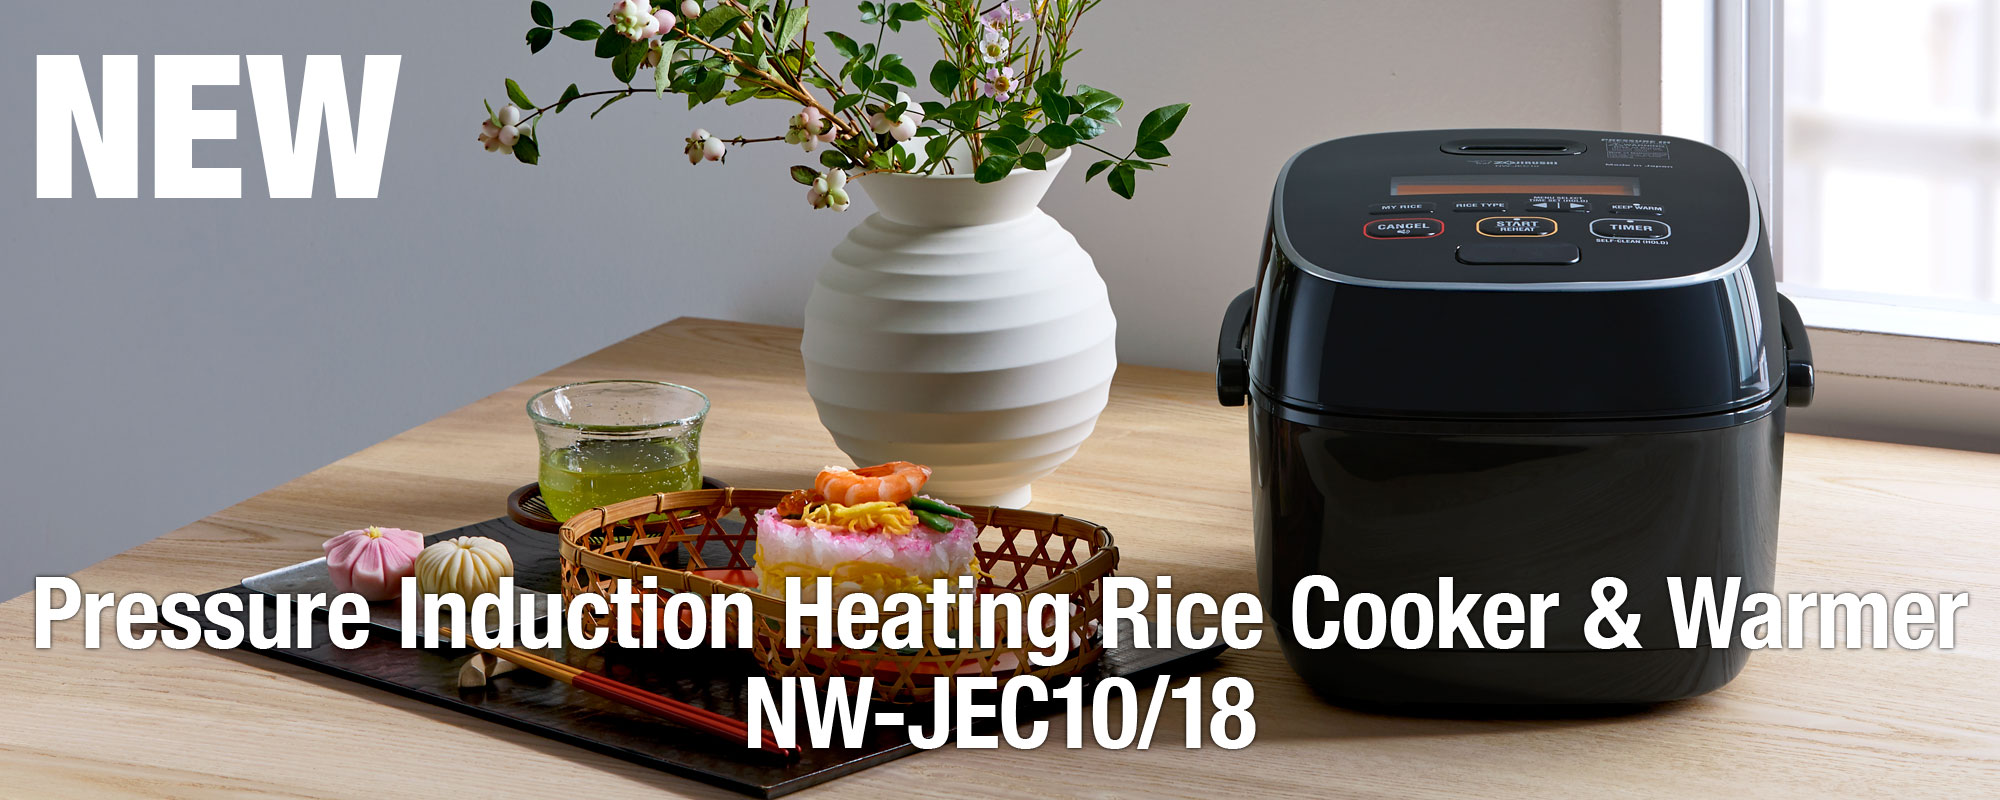 Pressure Induction Heating Rice Cooker & Warmer NW-JEC10/18